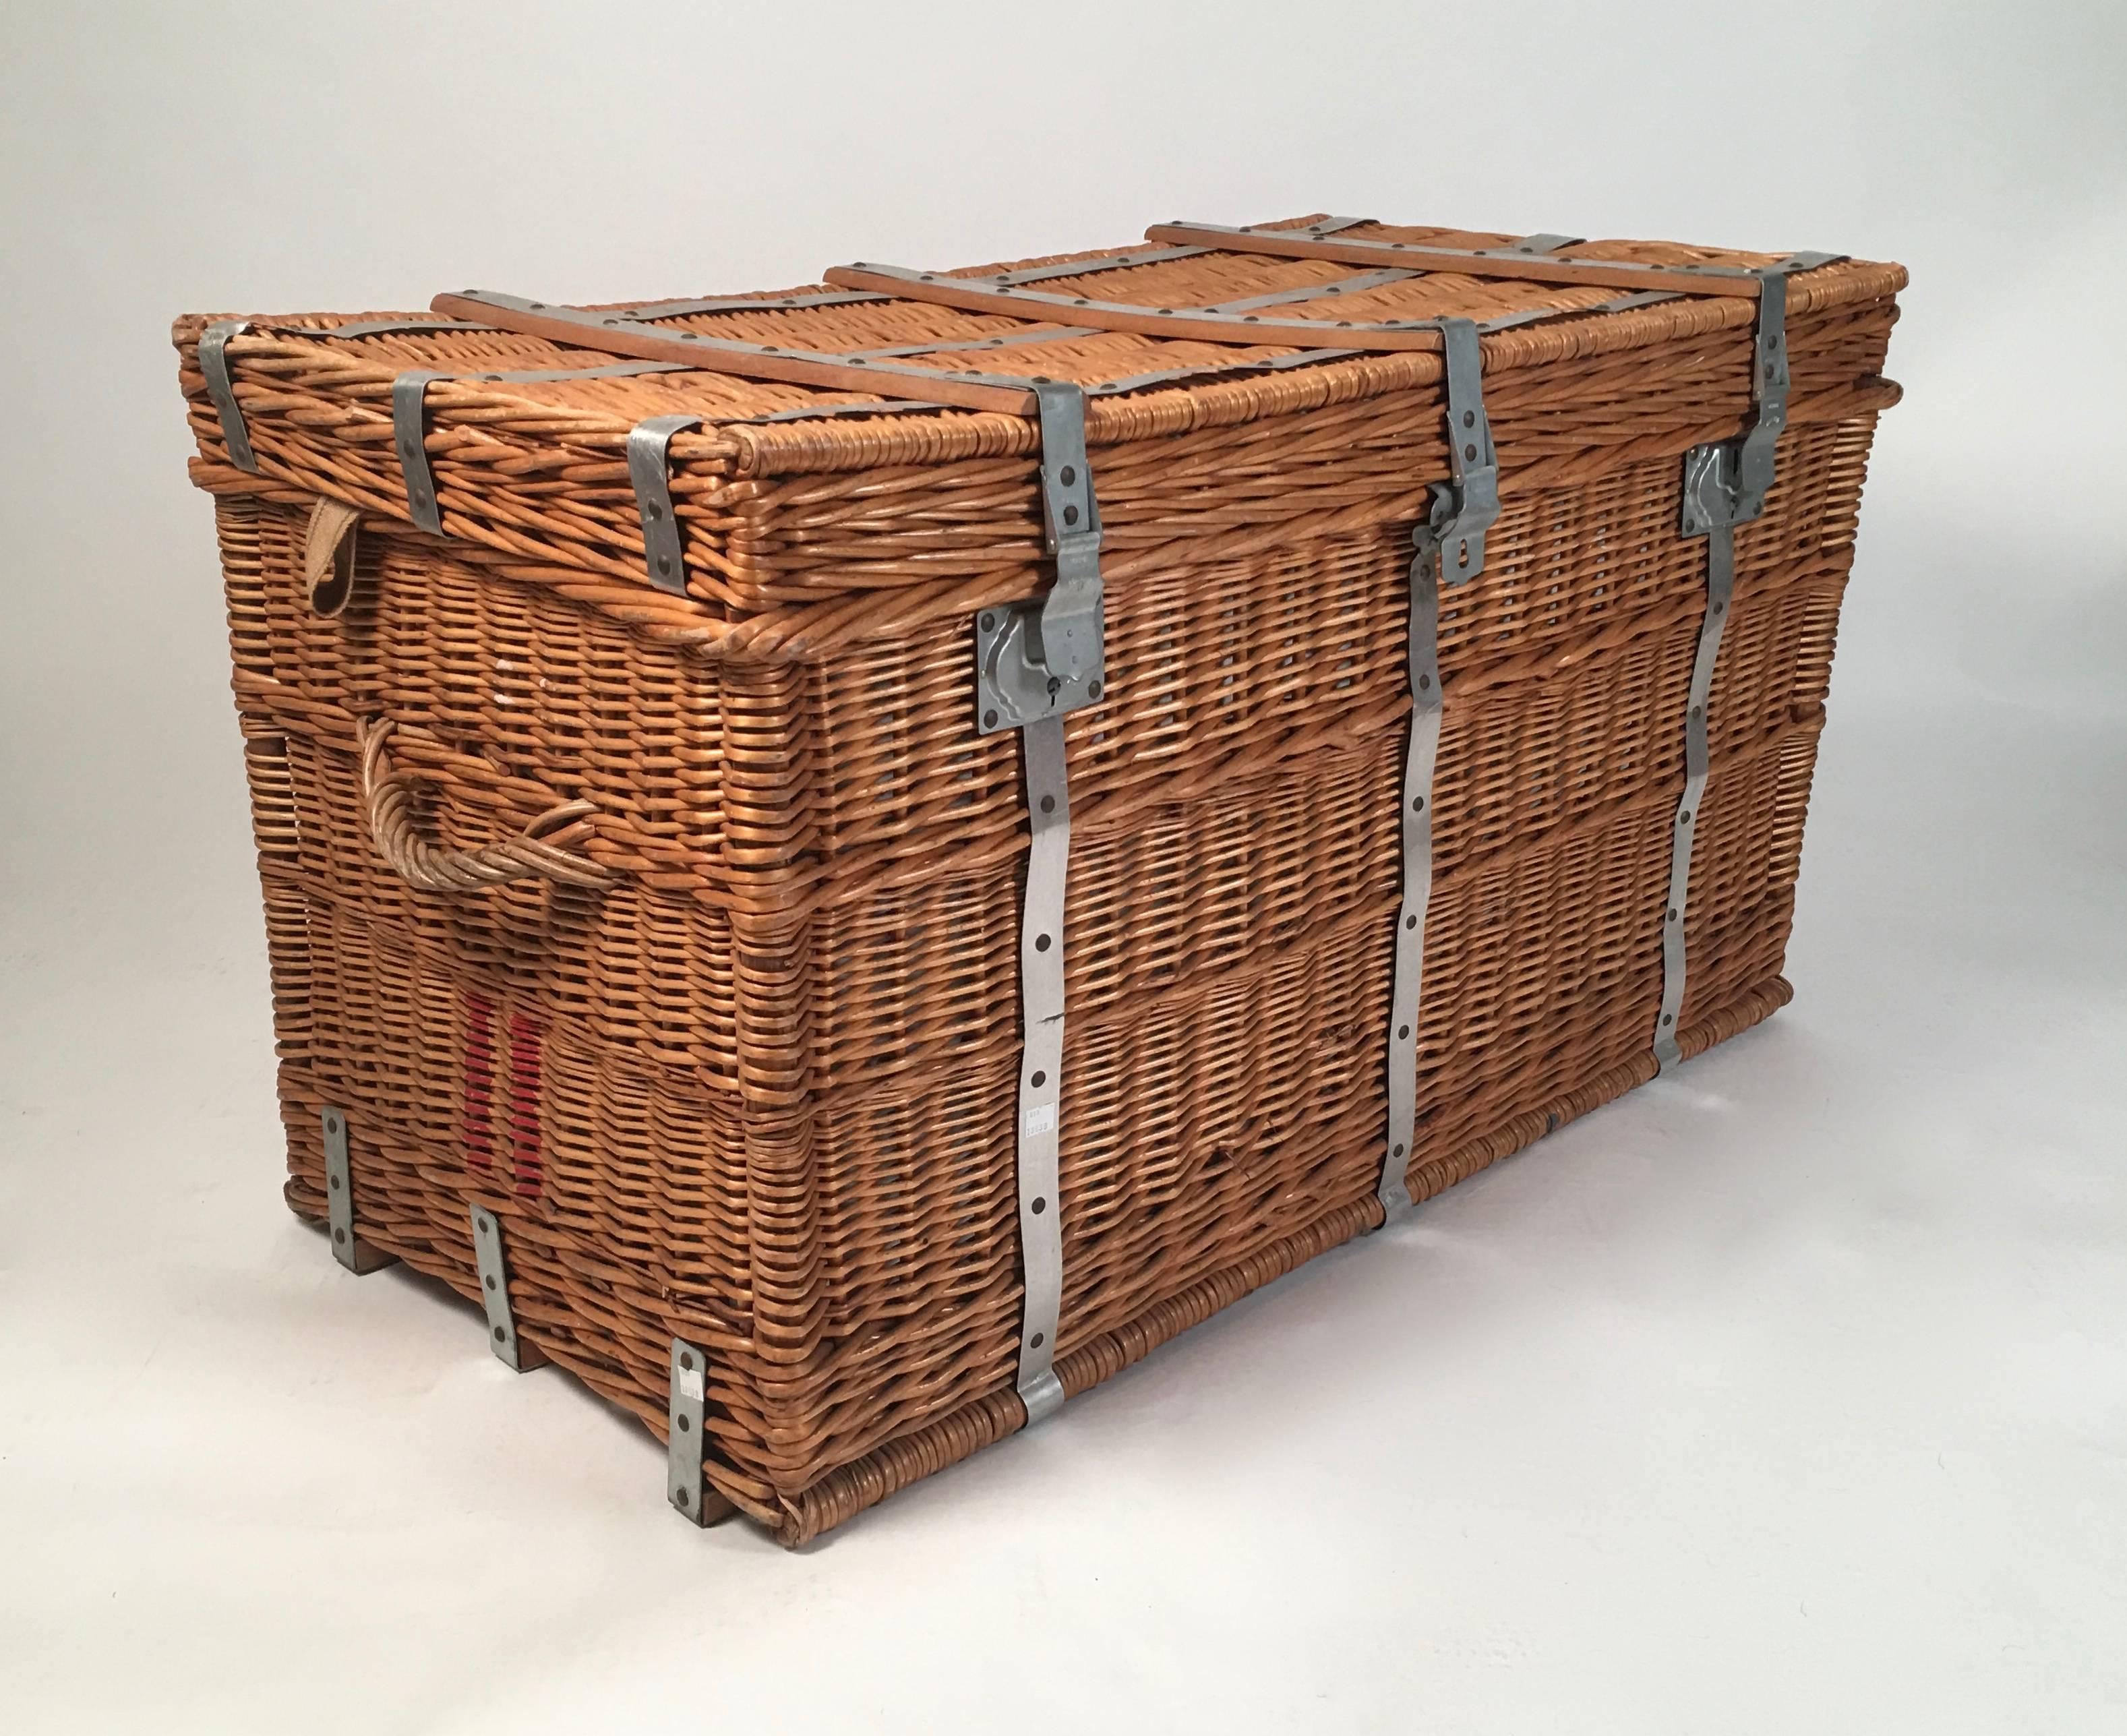 A large rectangular French wicker trunk with steel strap mounts, made by Bellbonn with two wicker strap handles and canvas straps on the interior of each side to keep cover up when open, painted with the number 11 in red on each side, the interior